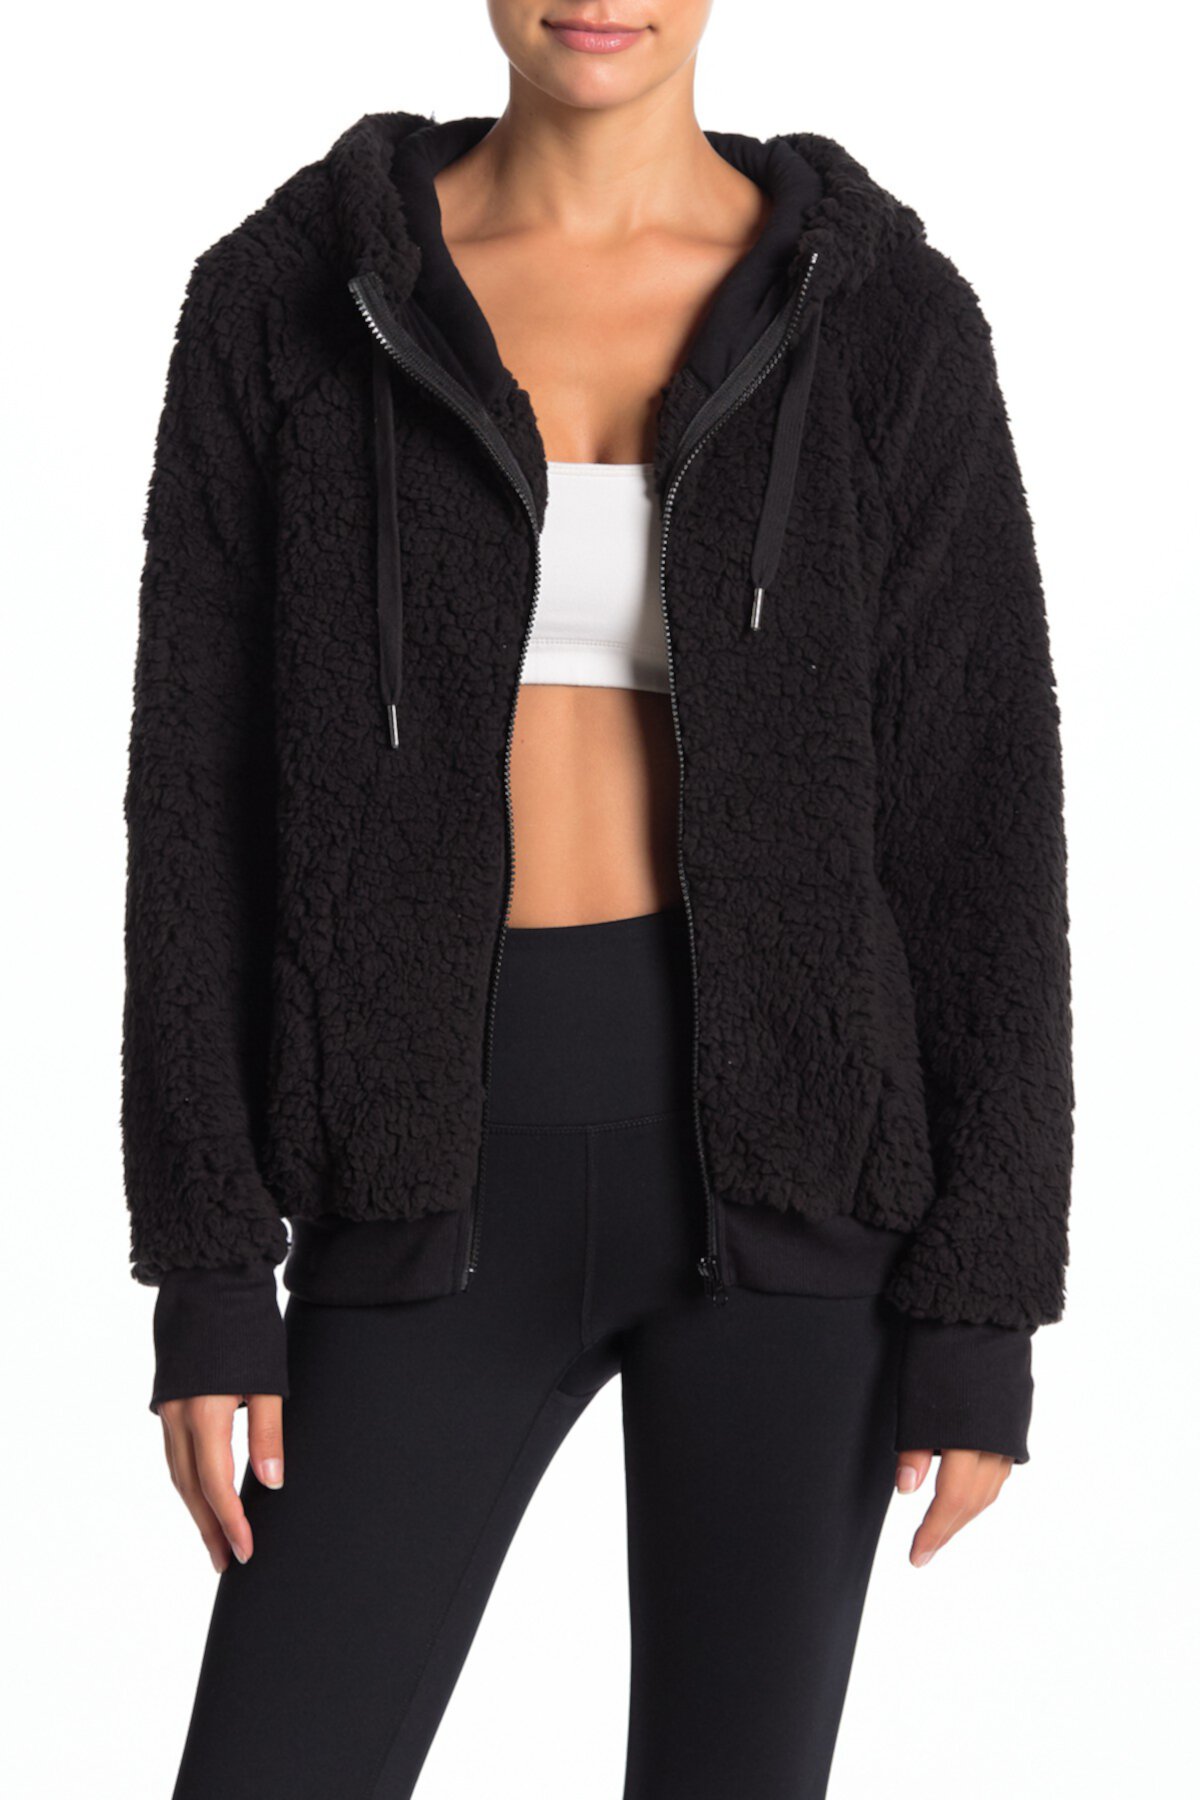 Up & Over Faux Shearling Bomber Z By Zella